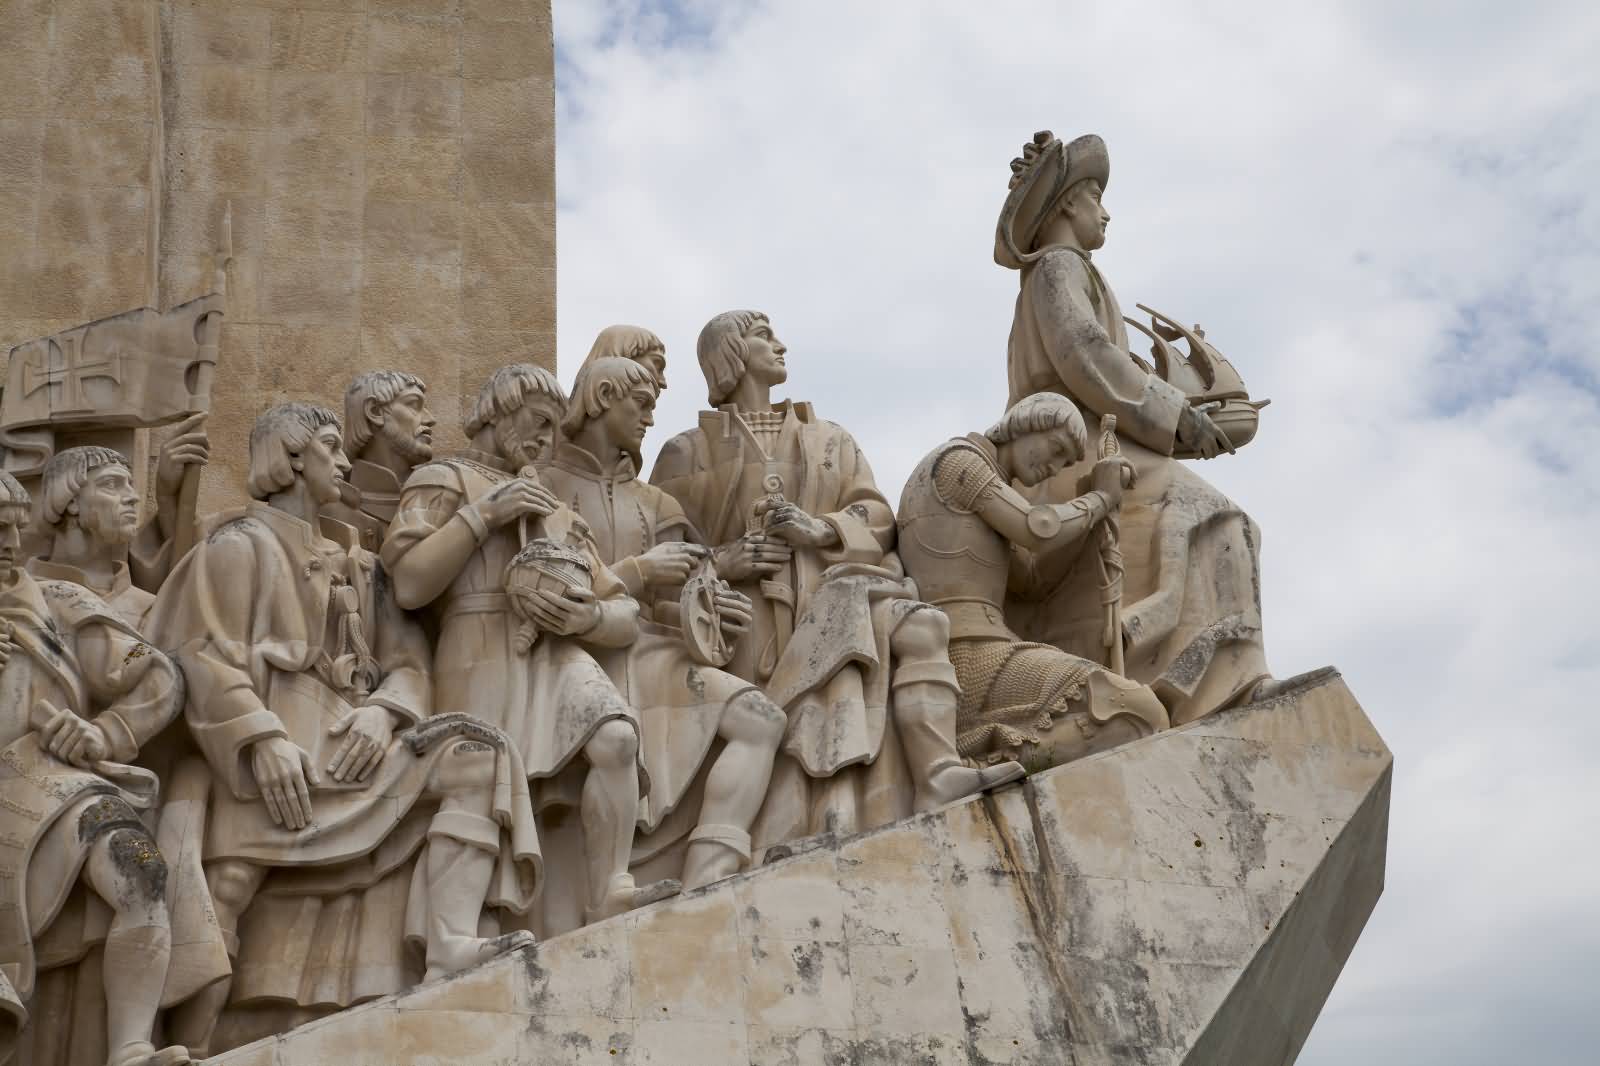 The Early Navigators Statues At Padrao dos Descobrimentos